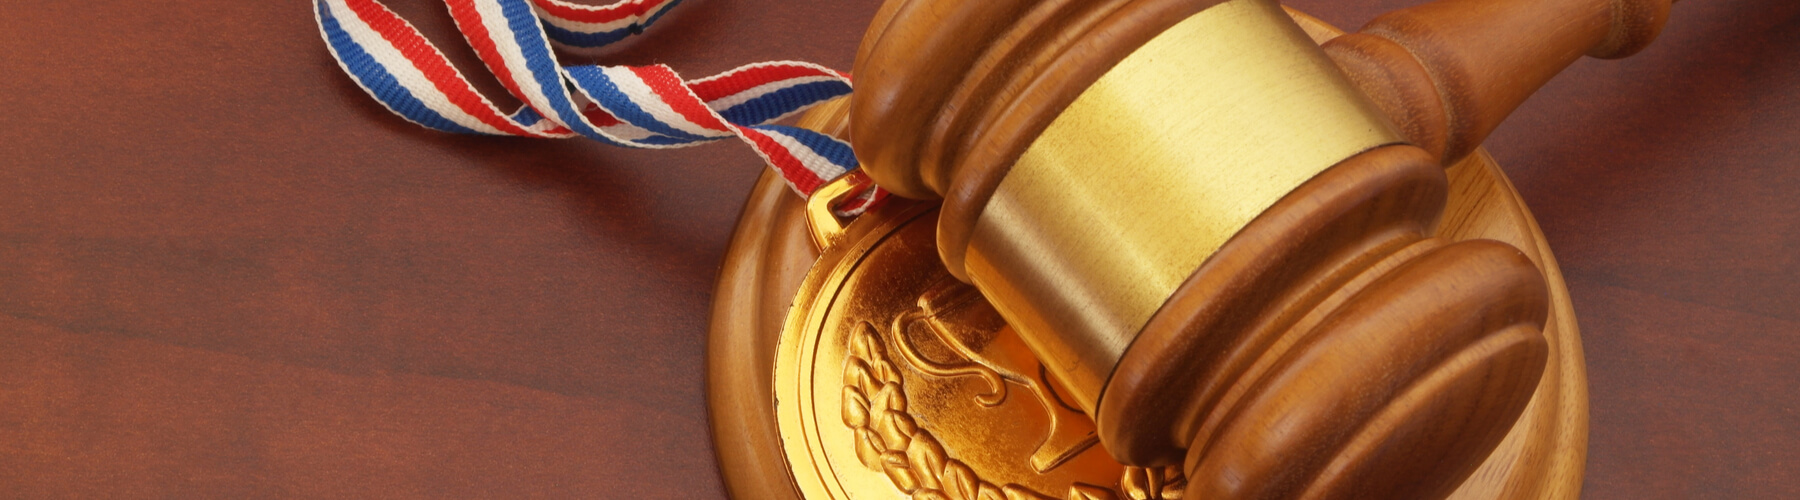 Medal and wooden judge's gavel on top of award